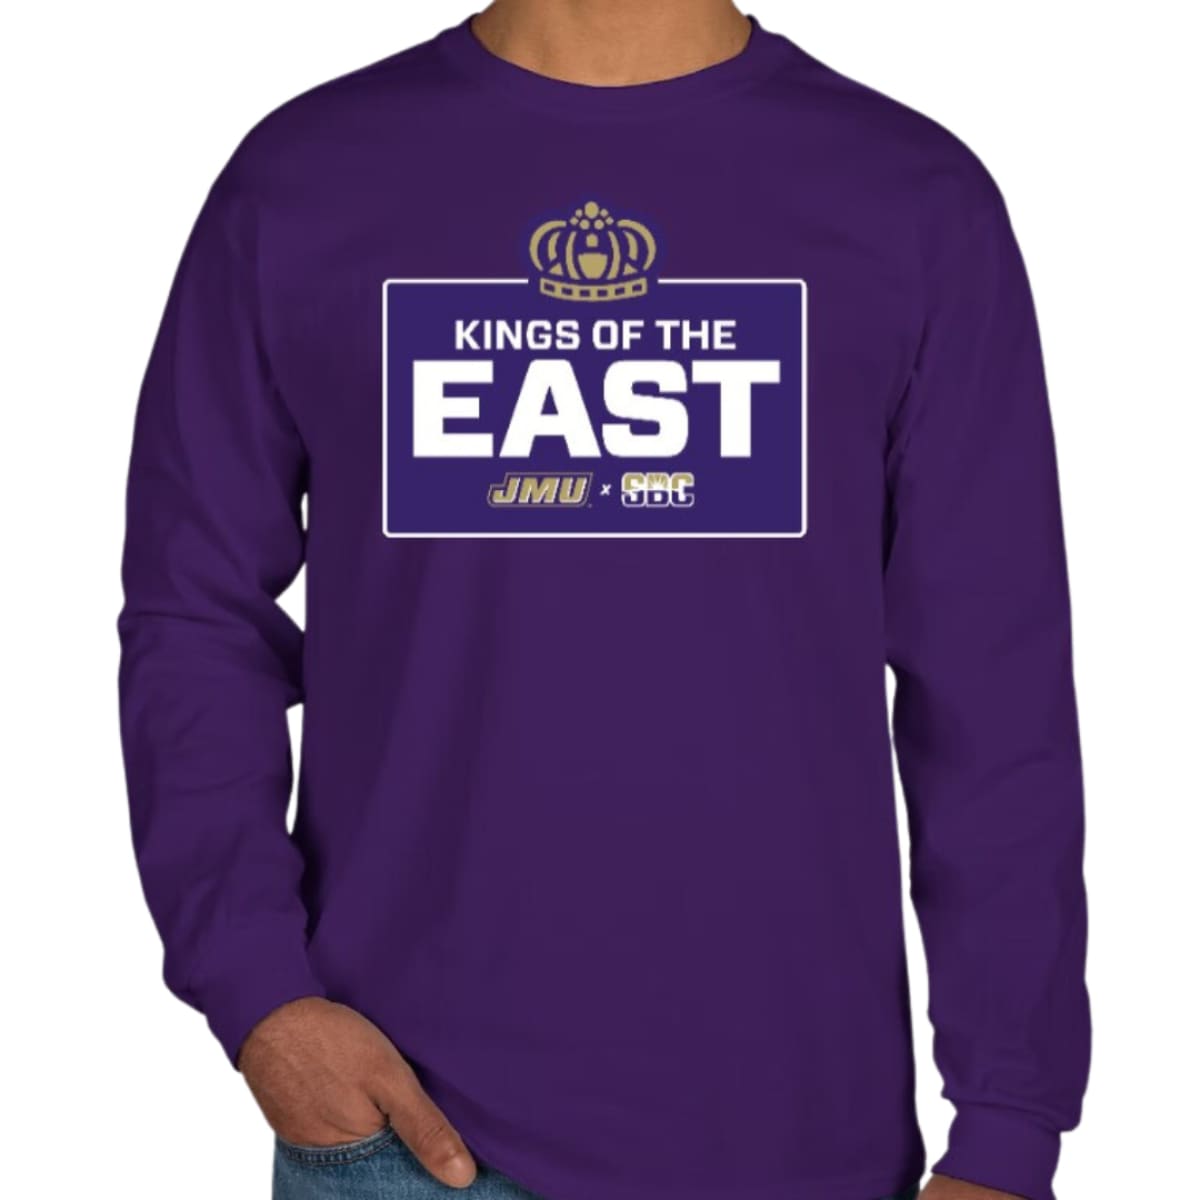 We Are the Kings of the East! - IN STOCK - SMALL / PURPLE